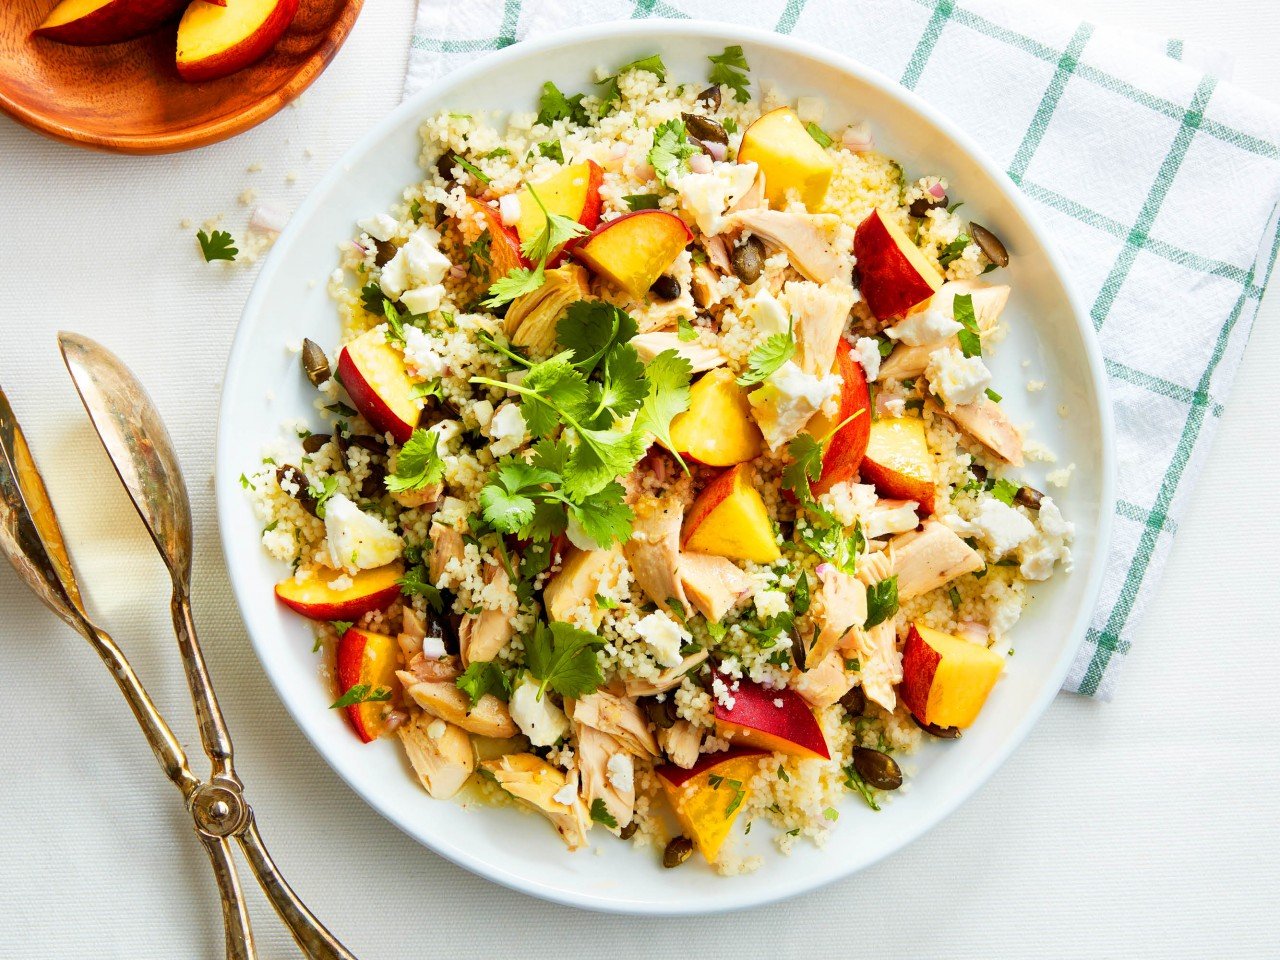 Peach and chicken couscous salad on a plate/